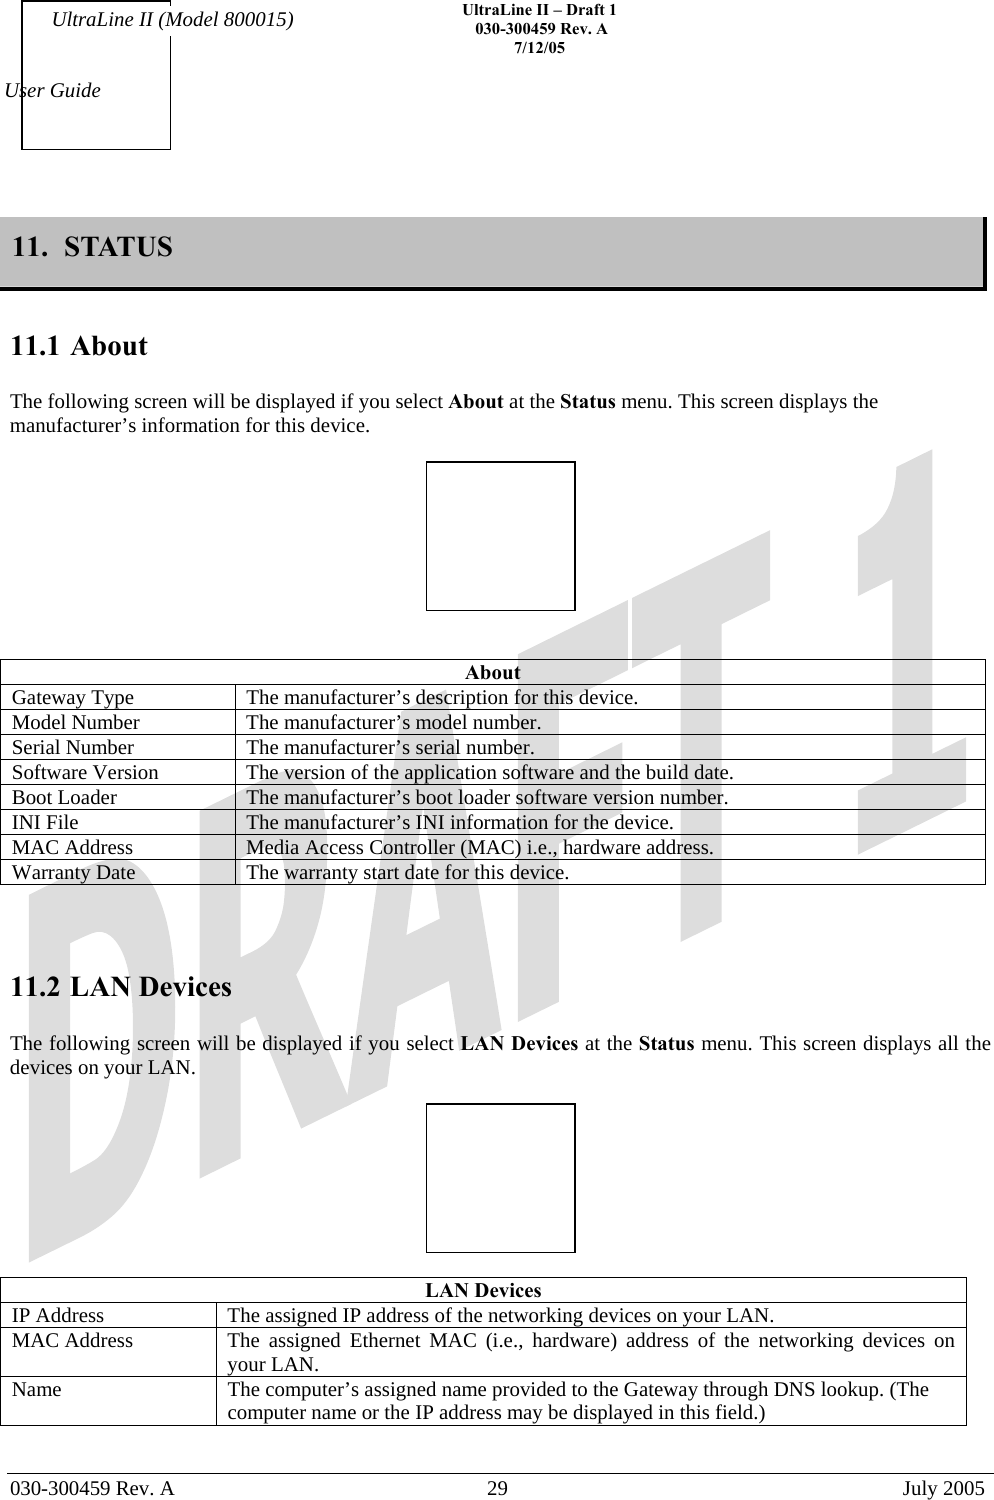    UltraLine II – Draft 1   030-300459 Rev. A 7/12/05   030-300459 Rev. A  29  July 2005  User Guide UltraLine II (Model 800015) 11.  STATUS   11.1 About  The following screen will be displayed if you select About at the Status menu. This screen displays the manufacturer’s information for this device.     About Gateway Type  The manufacturer’s description for this device. Model Number  The manufacturer’s model number. Serial Number  The manufacturer’s serial number. Software Version  The version of the application software and the build date. Boot Loader  The manufacturer’s boot loader software version number. INI File  The manufacturer’s INI information for the device. MAC Address  Media Access Controller (MAC) i.e., hardware address. Warranty Date  The warranty start date for this device.    11.2 LAN Devices  The following screen will be displayed if you select LAN Devices at the Status menu. This screen displays all the devices on your LAN.    LAN Devices IP Address  The assigned IP address of the networking devices on your LAN. MAC Address  The assigned Ethernet MAC (i.e., hardware) address of the networking devices on your LAN. Name  The computer’s assigned name provided to the Gateway through DNS lookup. (The computer name or the IP address may be displayed in this field.)  